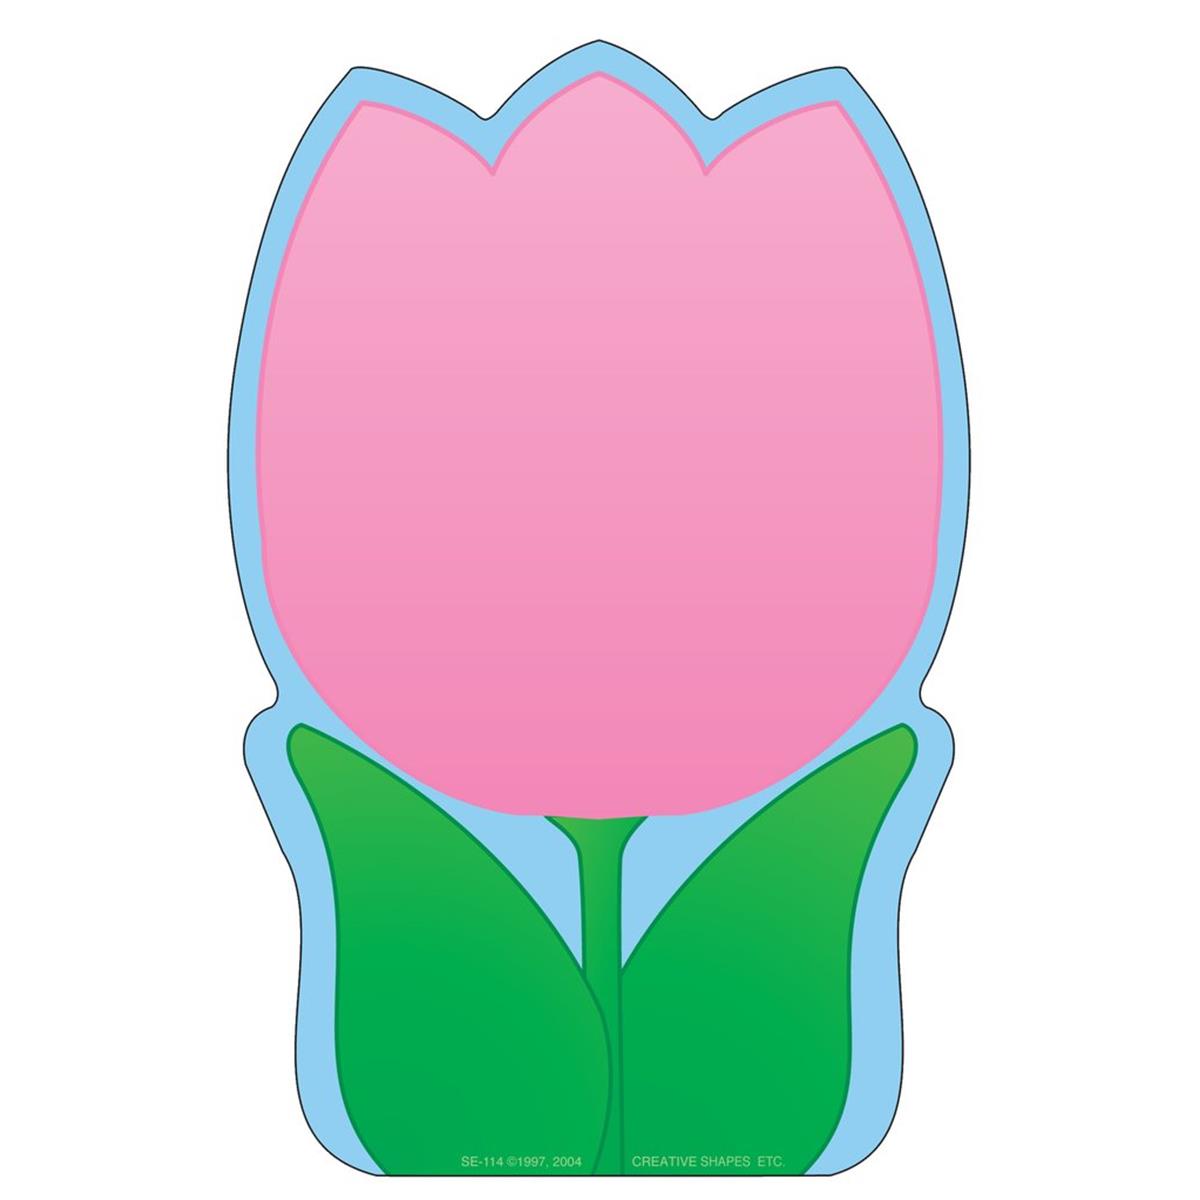 Se-0114 9 X 6 In. Large Notepad, Tulip - 50 Sheets Per Pack